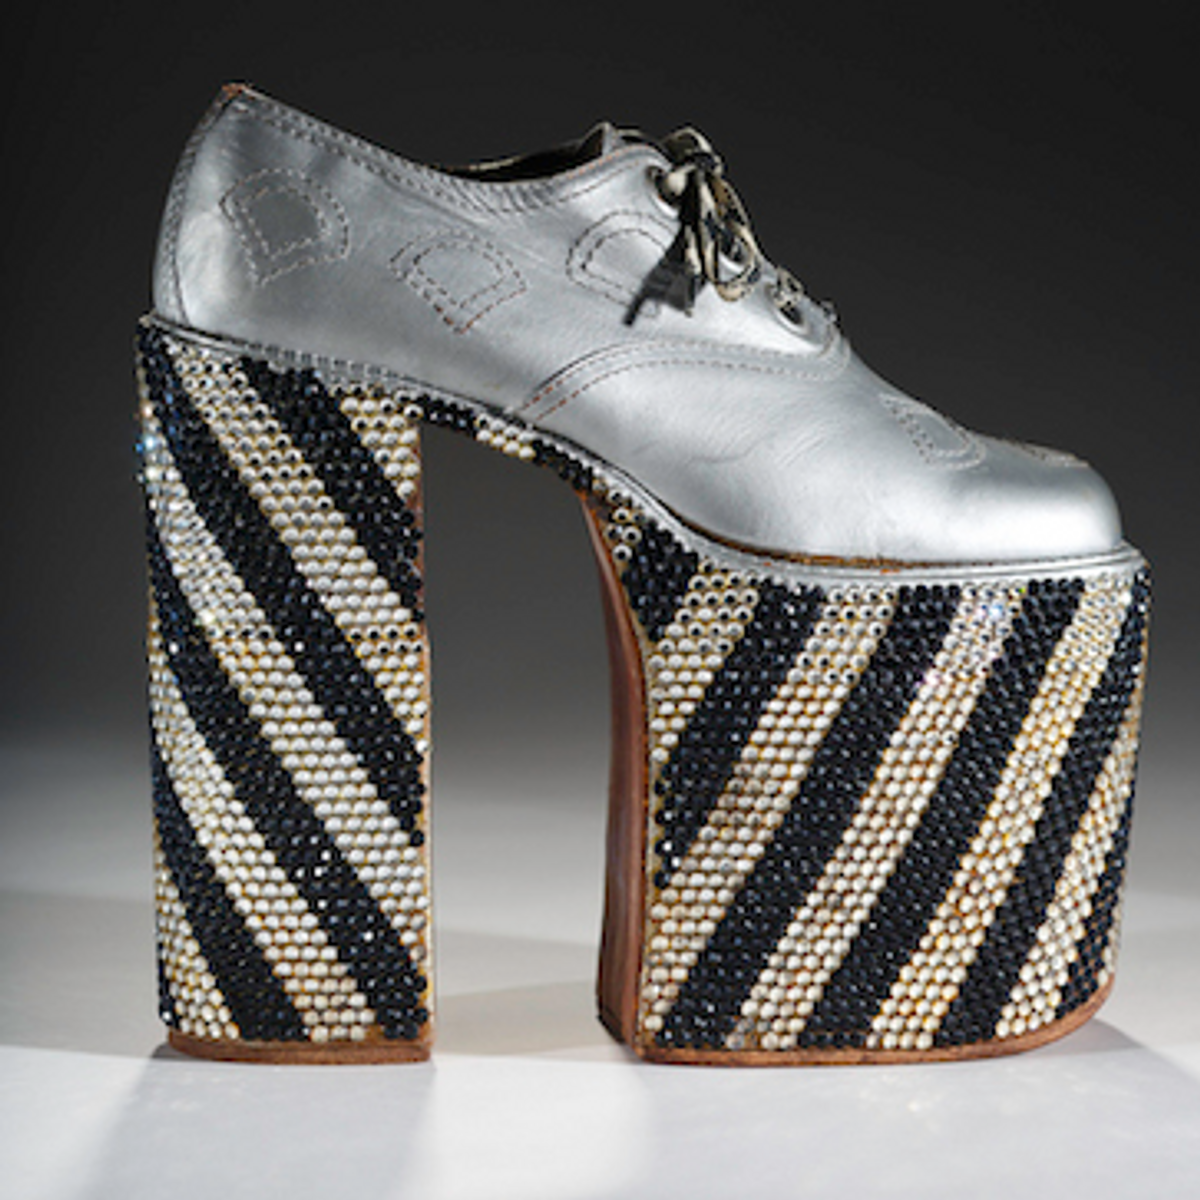 Don't Miss: Toronto's Standing Tall: A Curious History of Men in Heels Exhibit